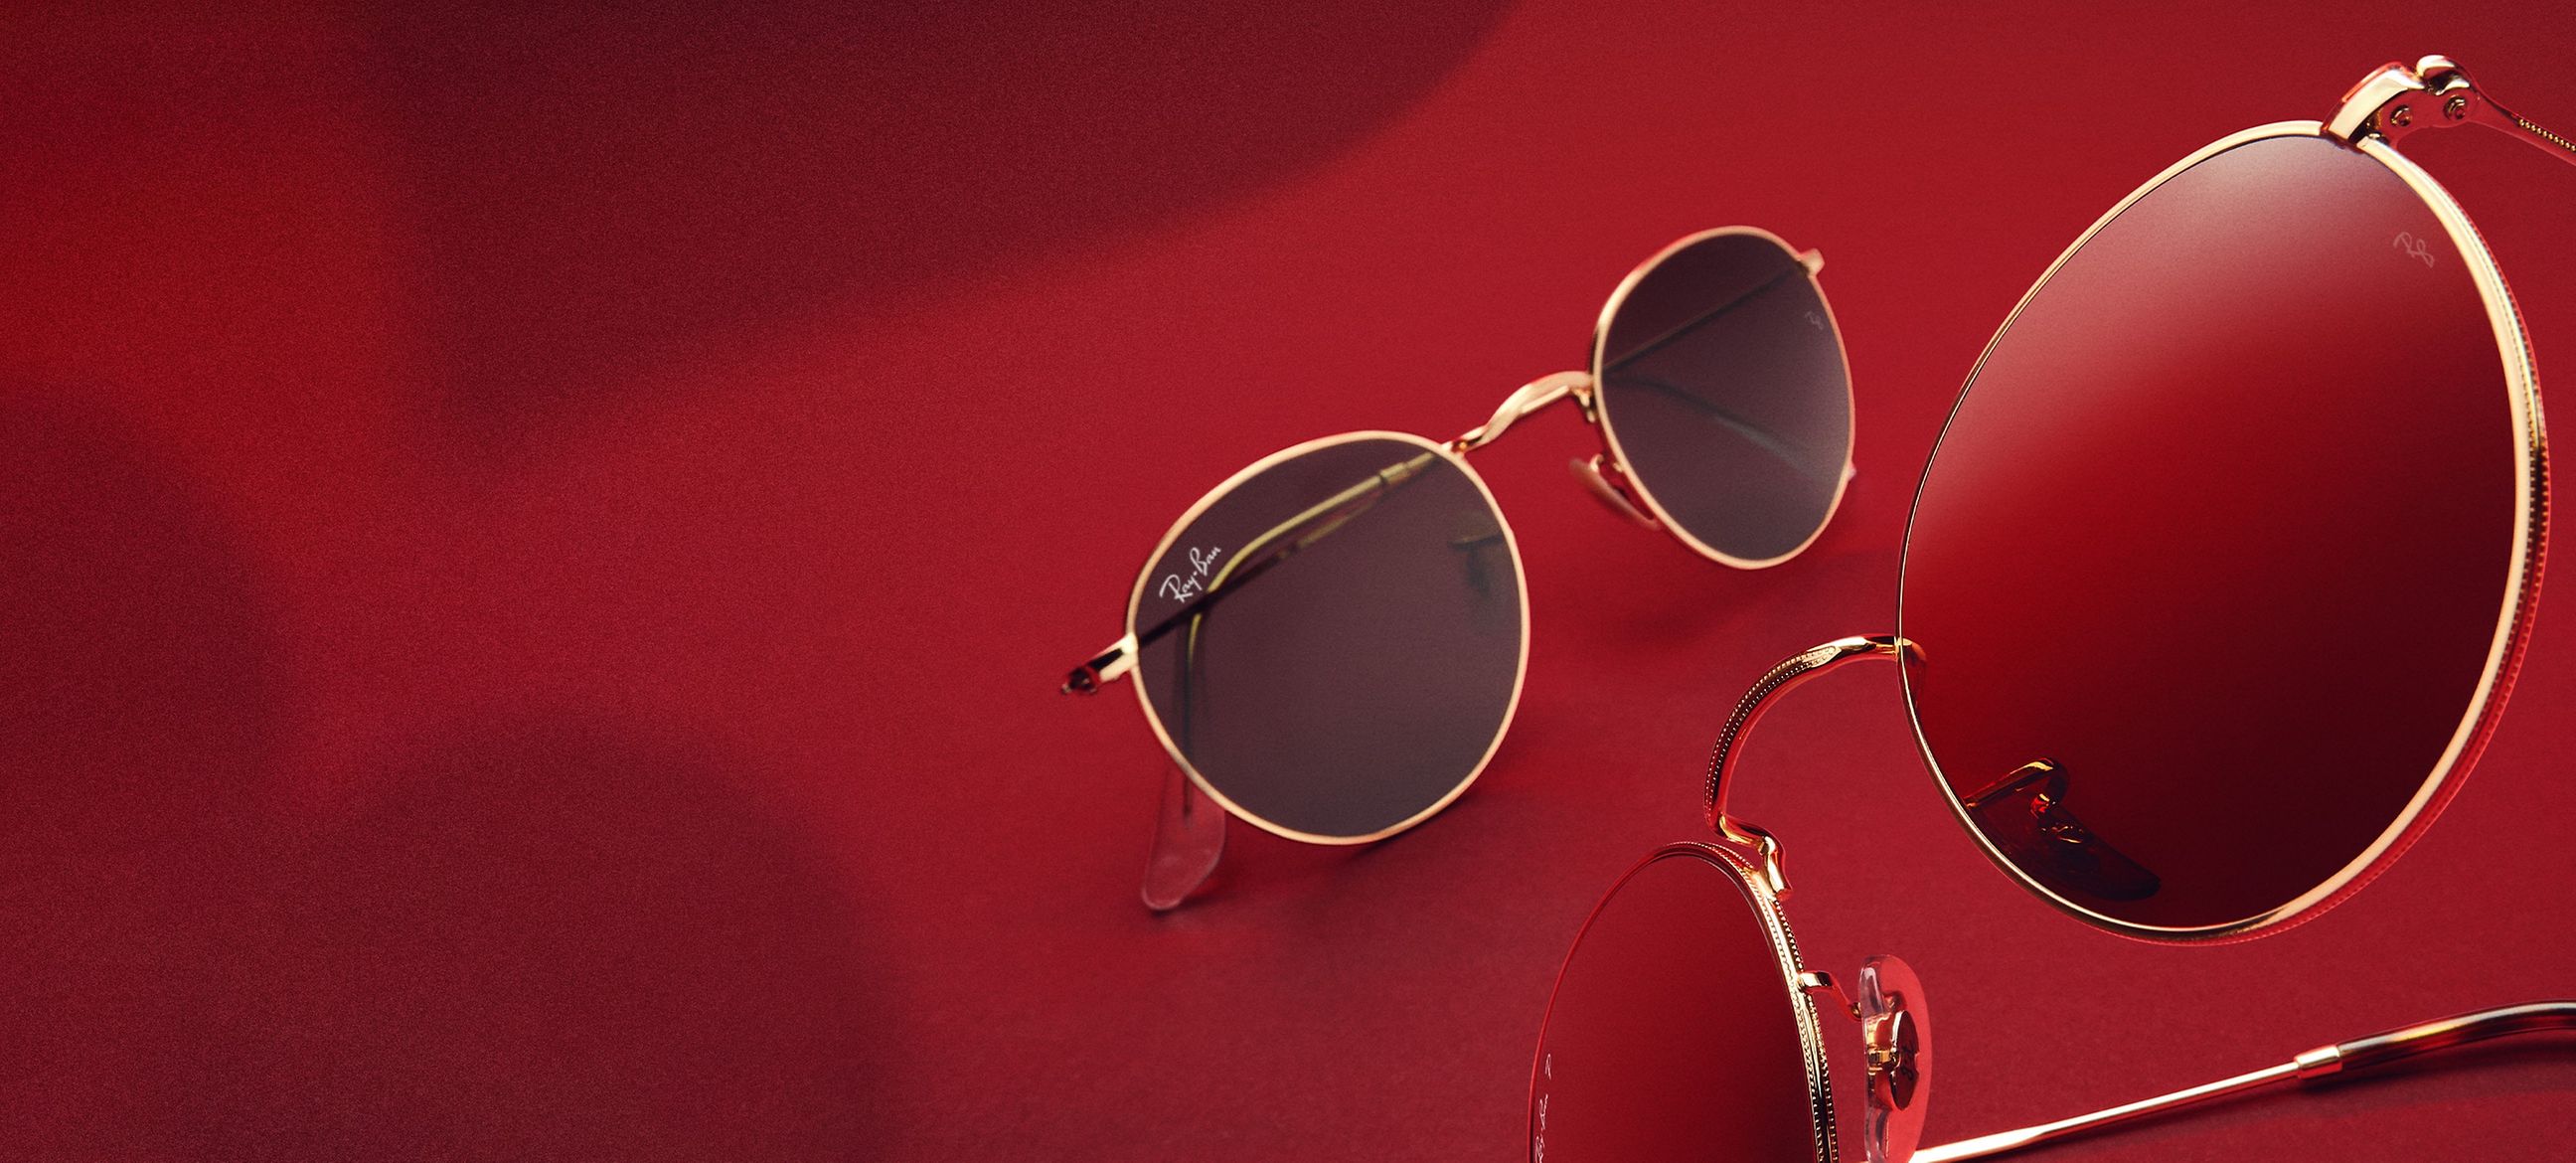 Ray-Ban® Sunglasses Official US Store: up to 50% Off on Select Styles